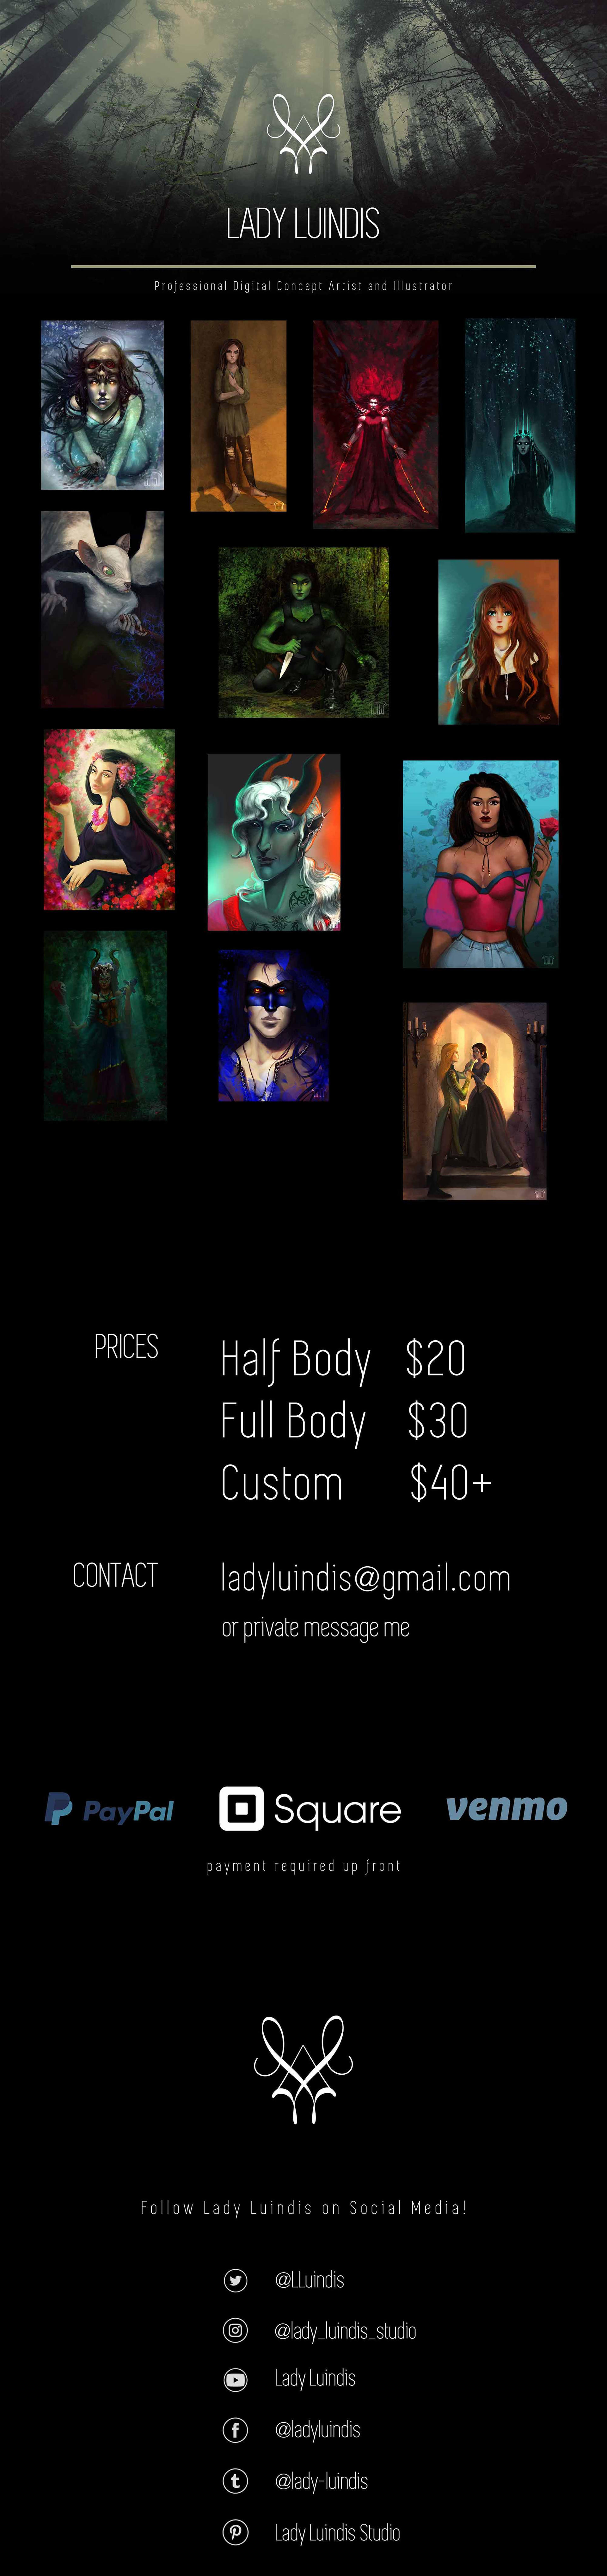 banner_deviantart_commisions_by_luindis_ddll1ss-fullview.jpg